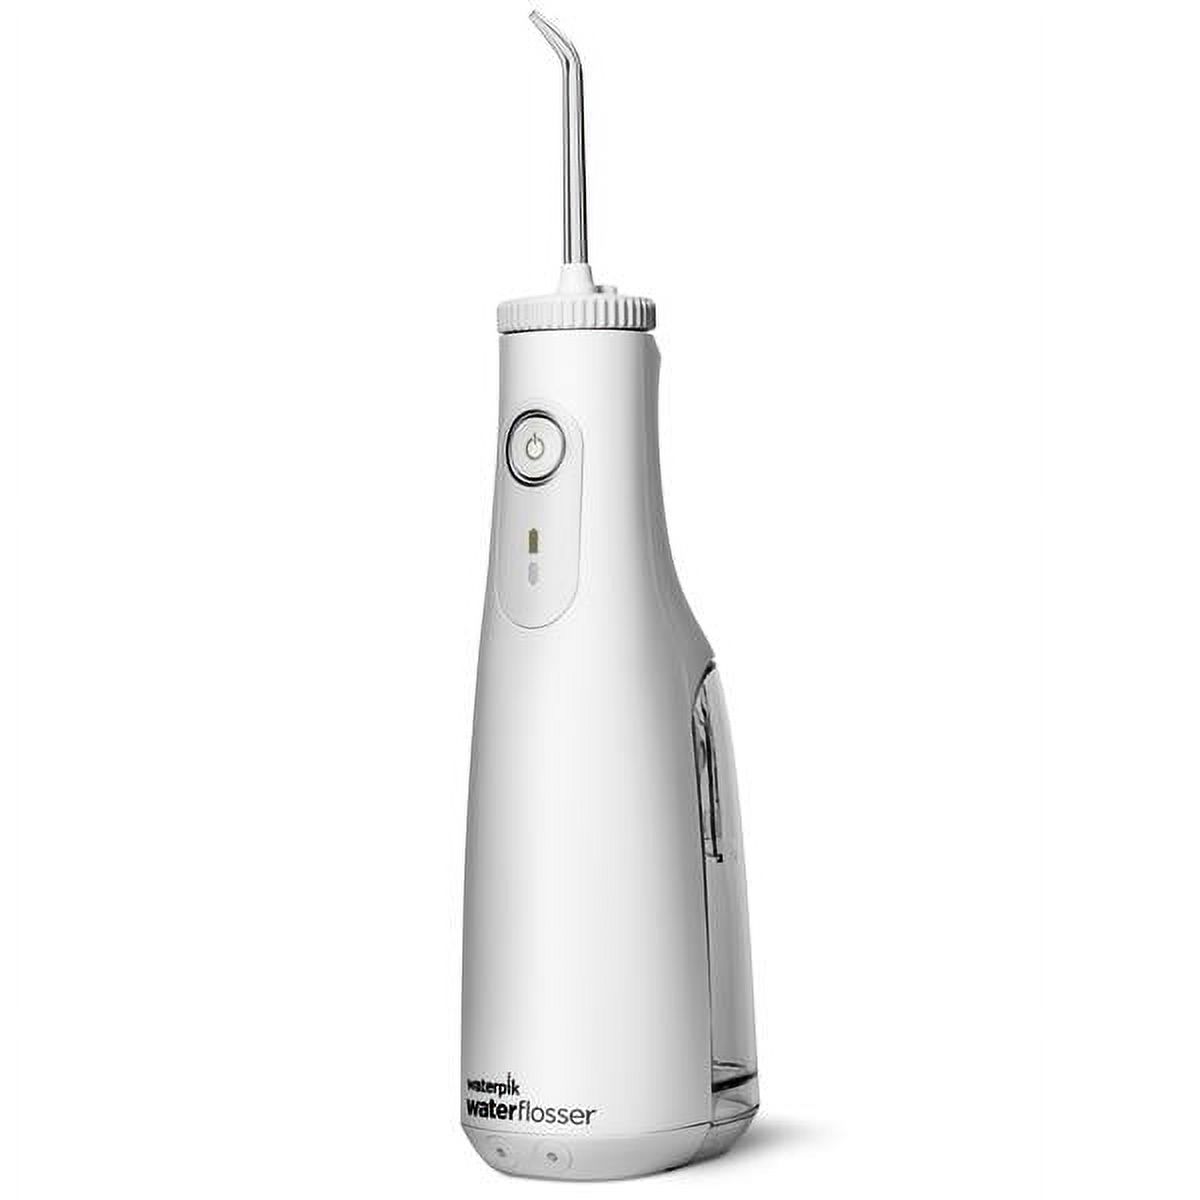 Waterpik Water Flosser Cordless Select Dental Oral Irrigator - Portable and USB Rechargeable Waterproof Water Flosser for Home and Travel, Braces & Bridges Care for Teeth (WF-10W10) - image 1 of 7